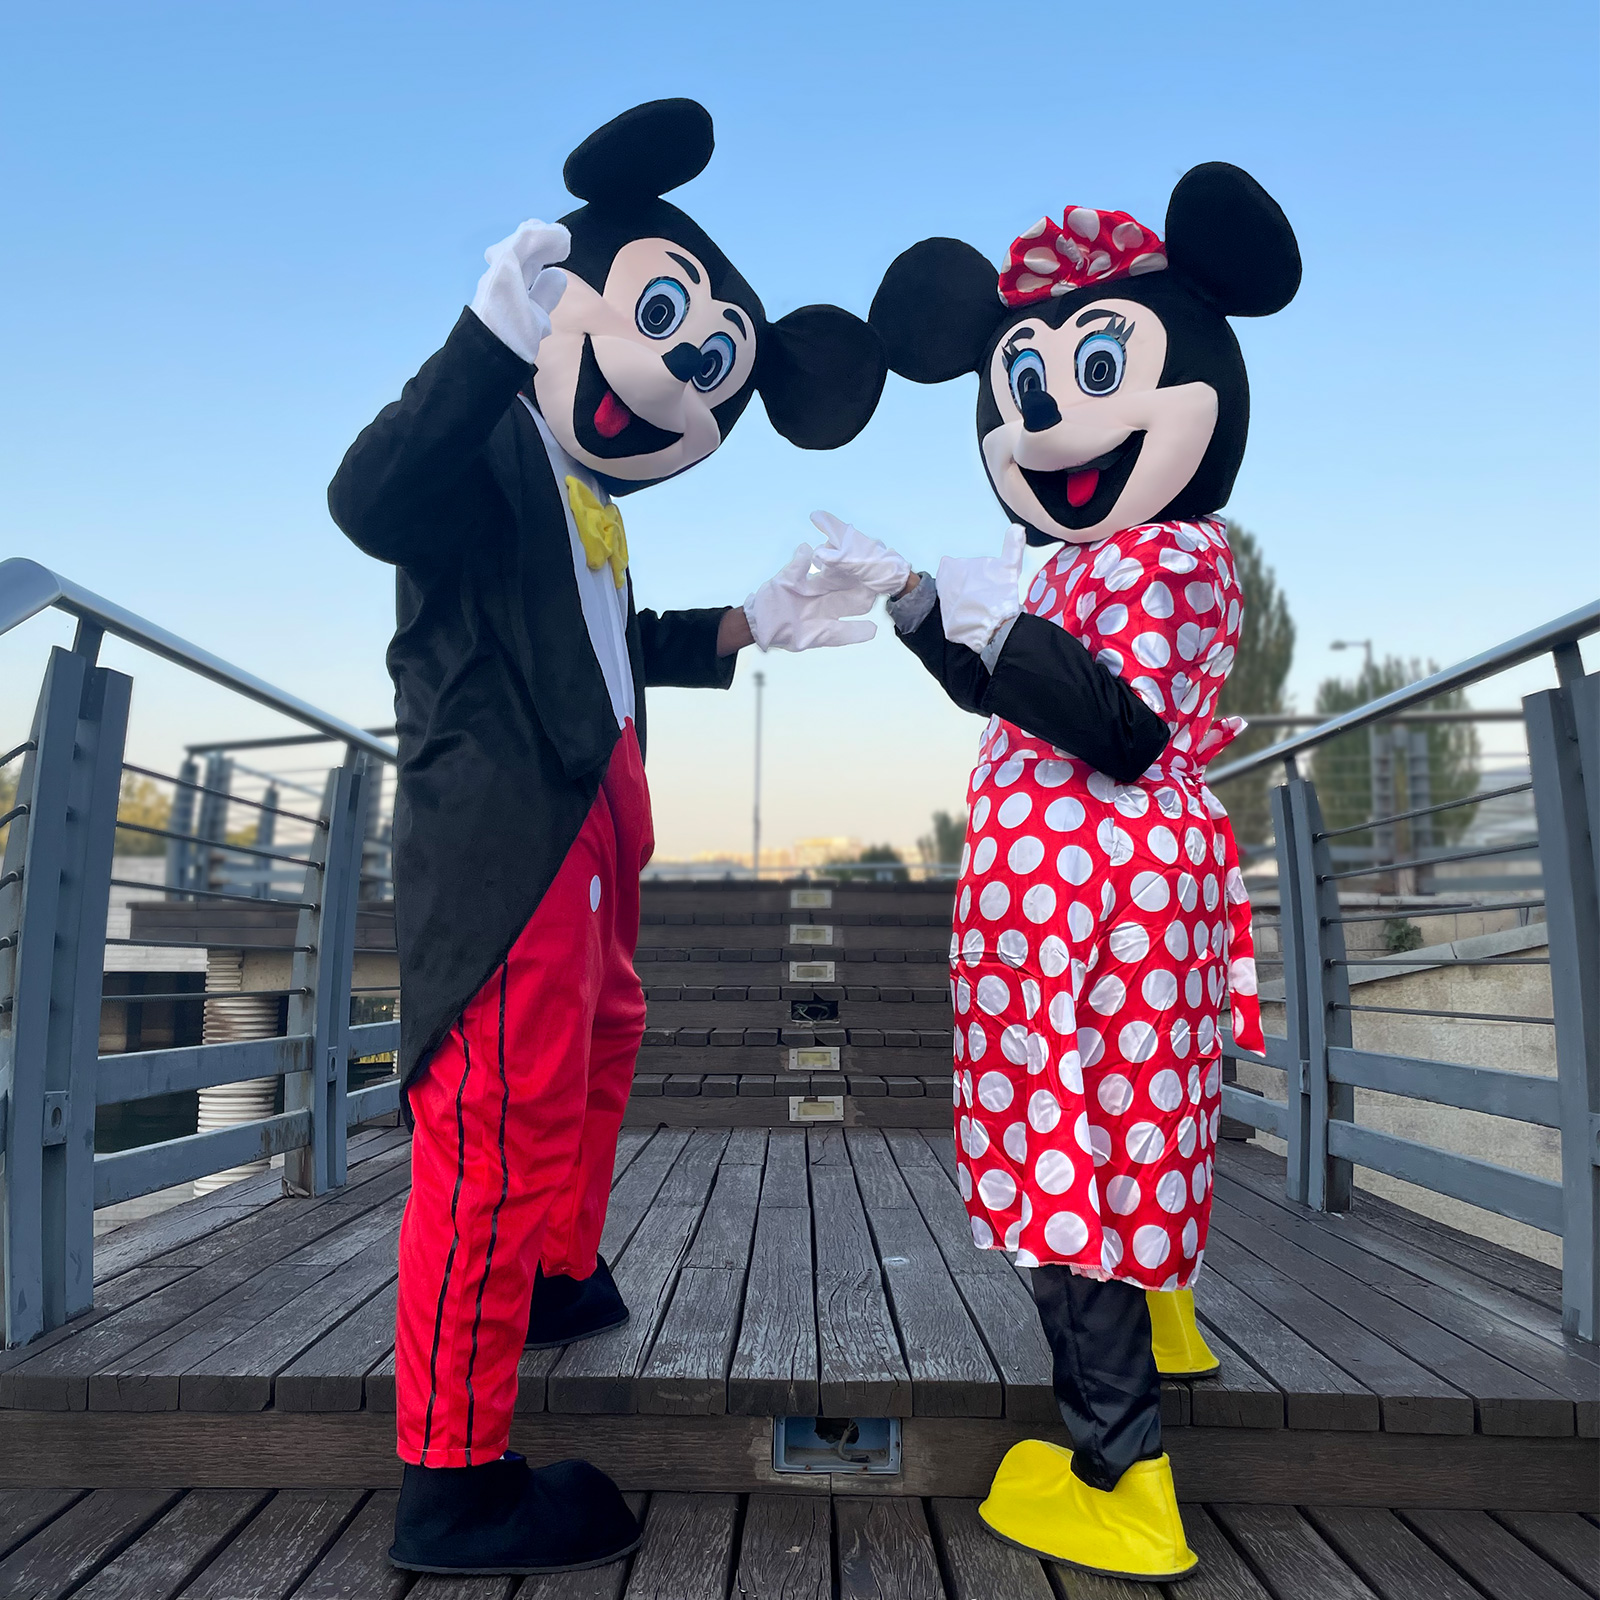 Classic Mascot Costume Compatible with Mickey and Minnie Mouse Adult Size for Men & Women Birthday Party - image 2 of 5